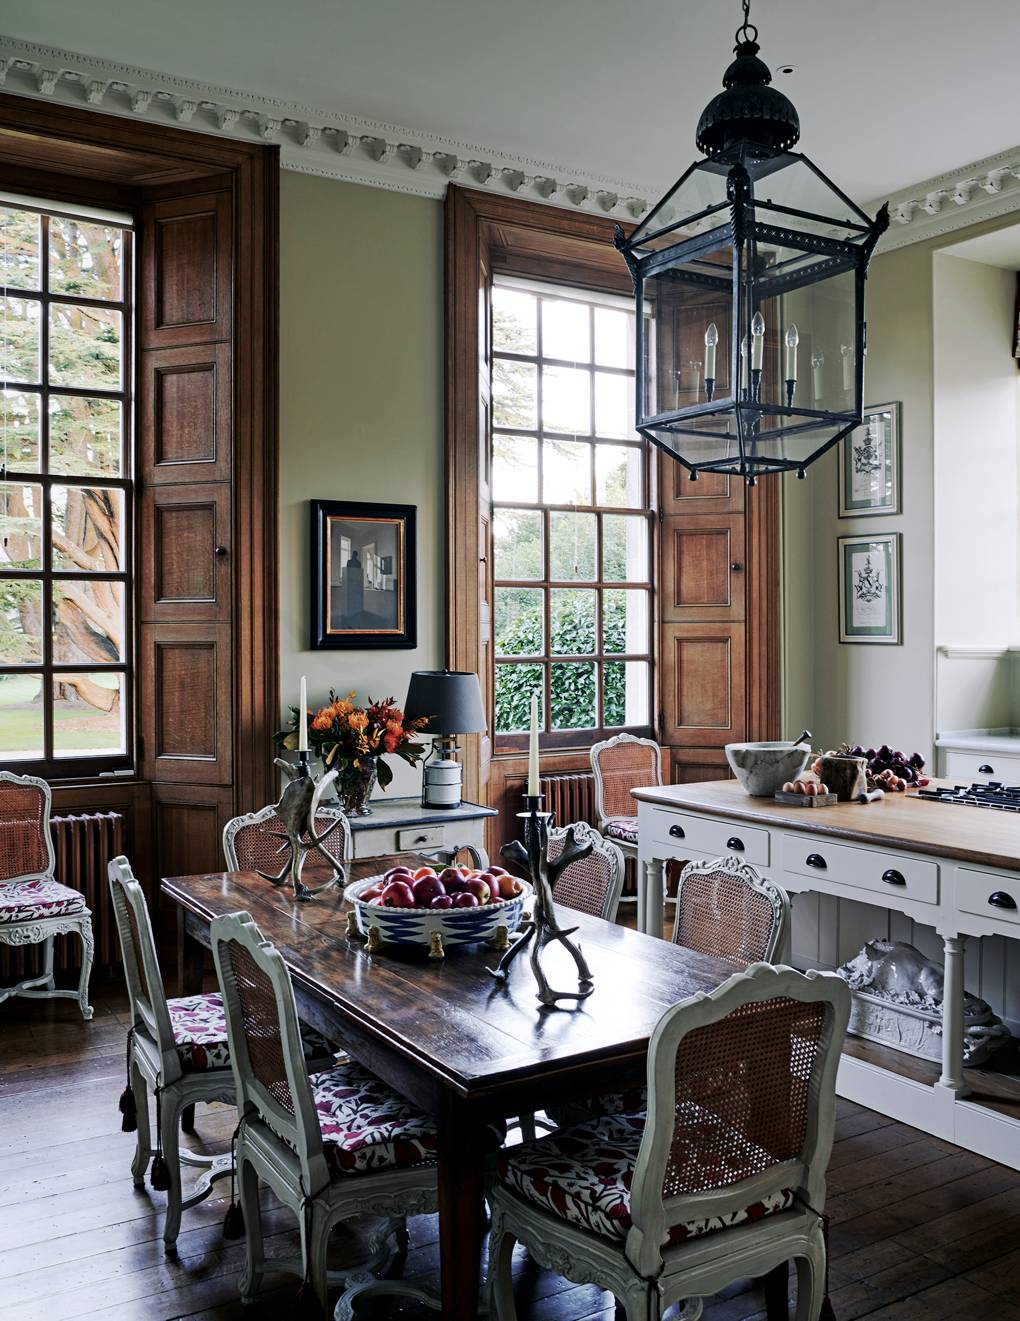 Décor Inspiration: Ven House, an Eighteenth-Century Country House in Somerset